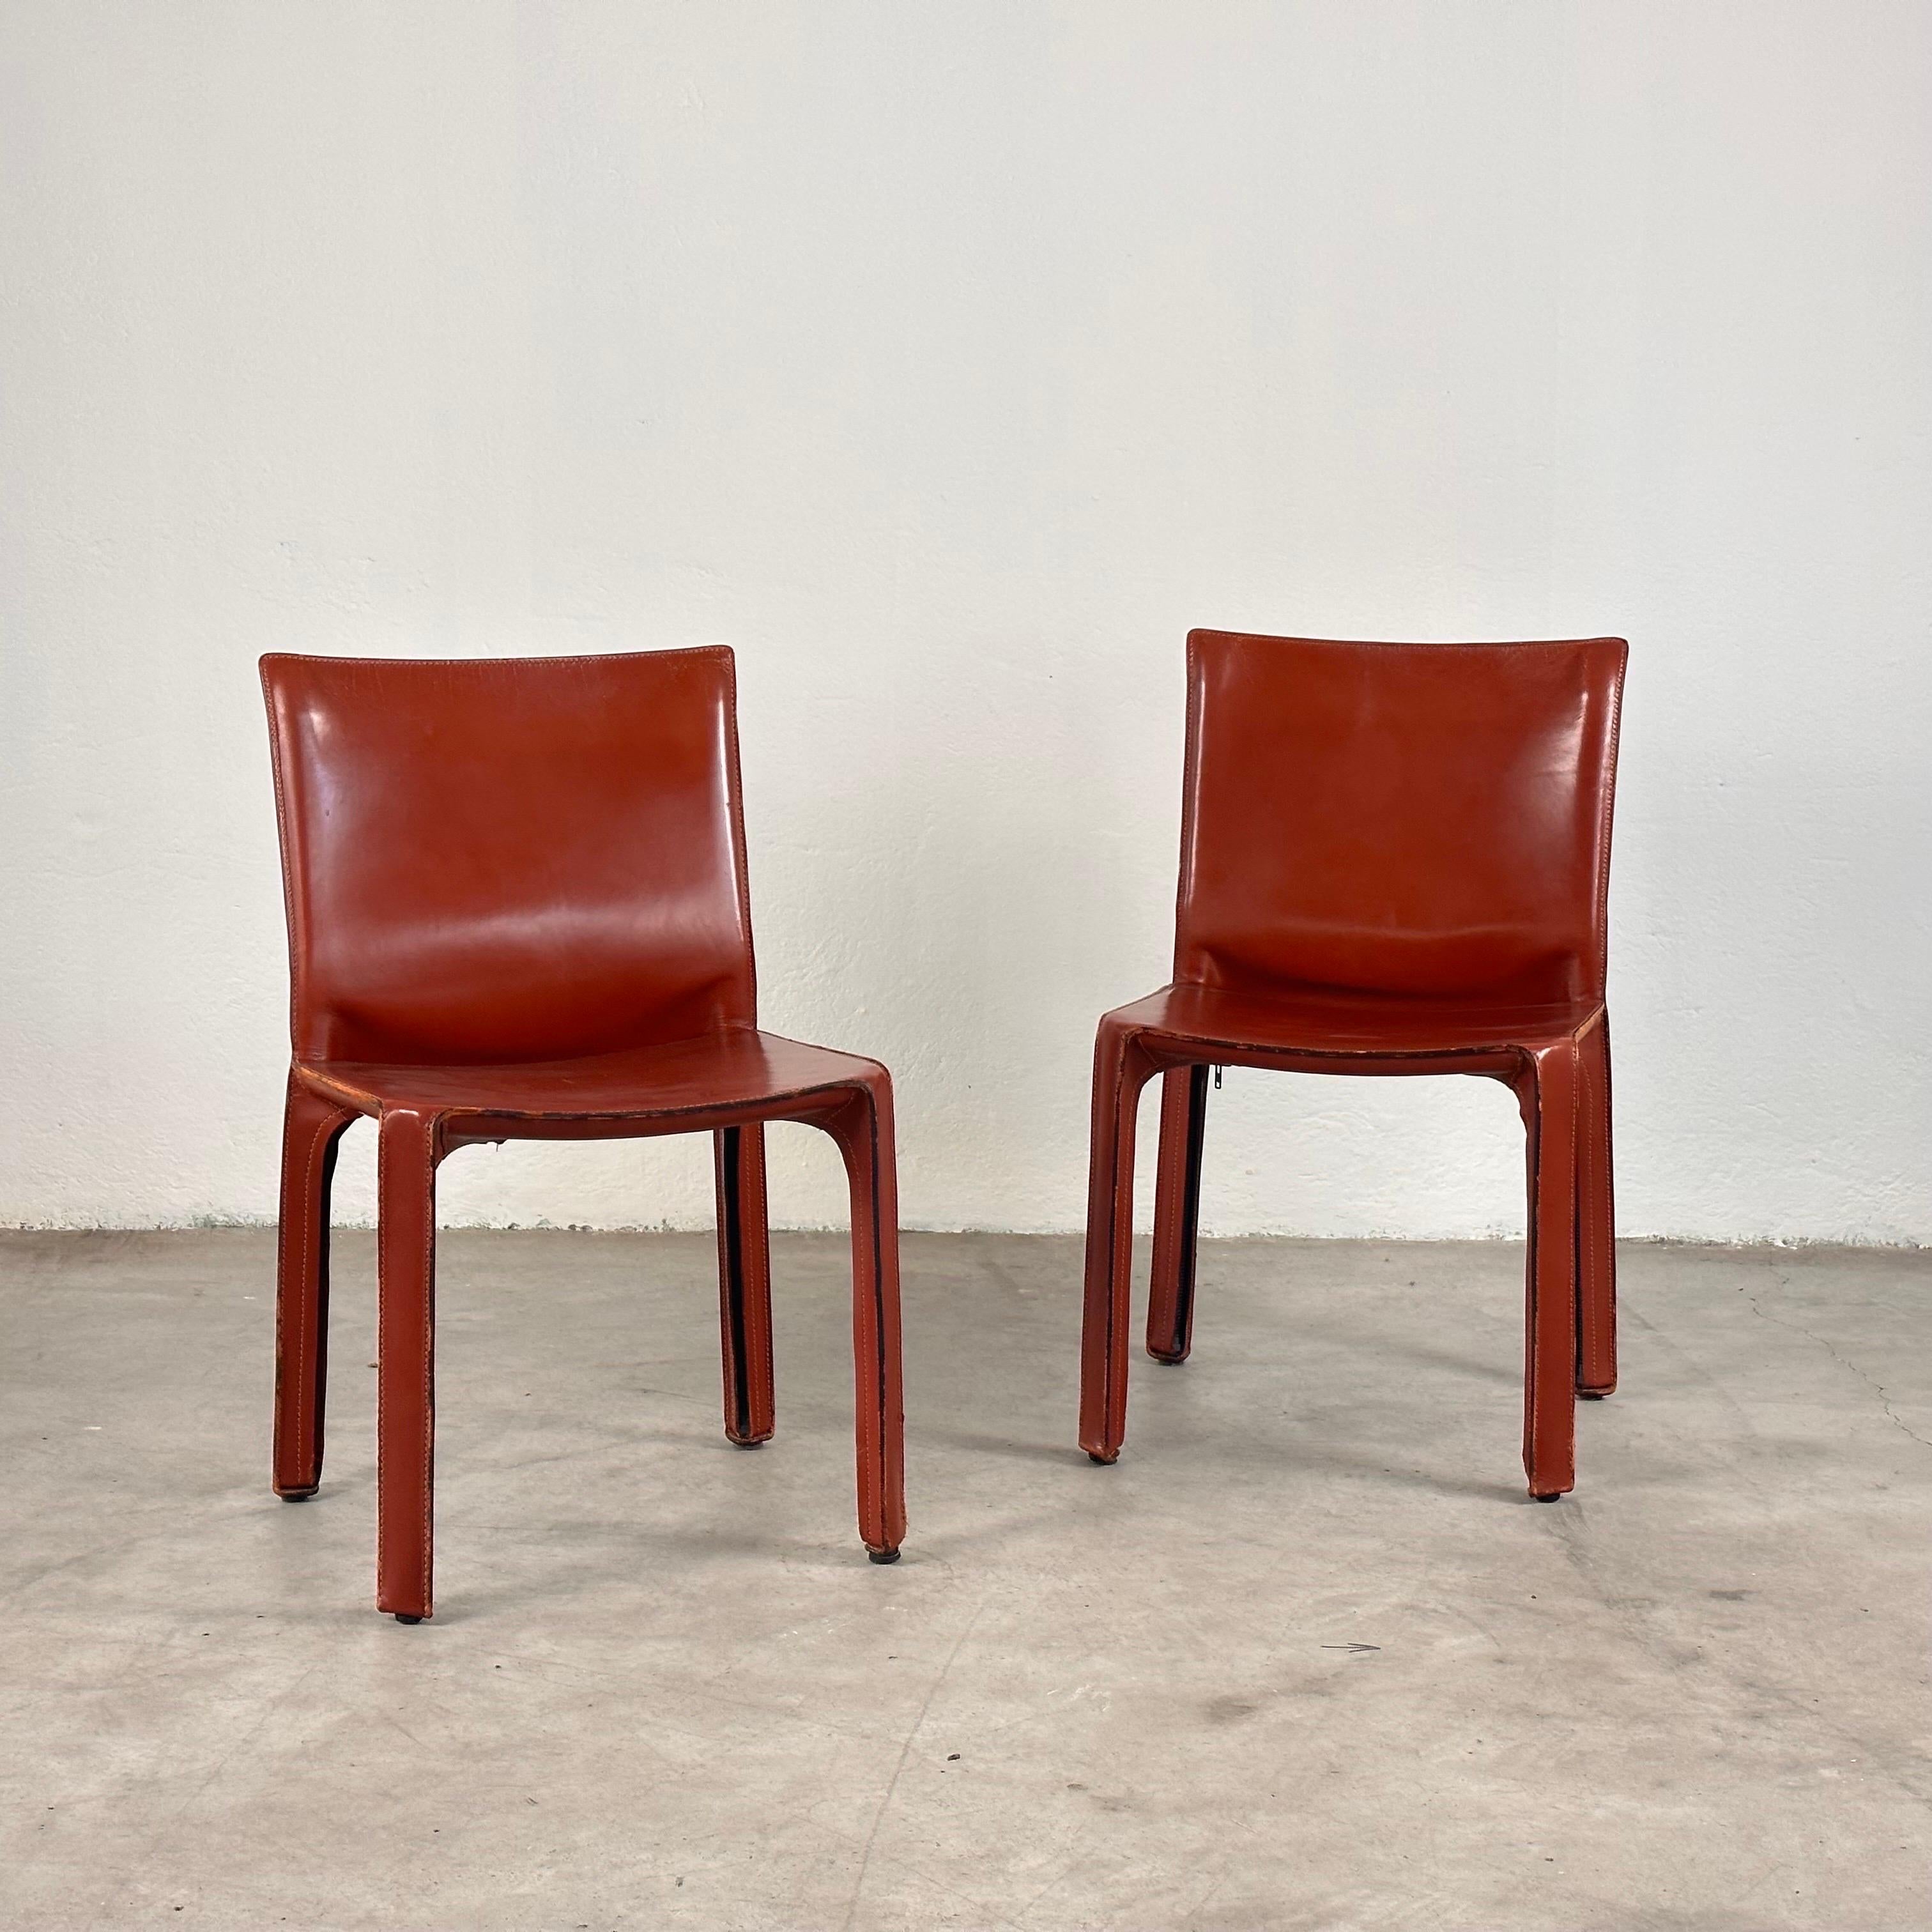 Indulge in the epitome of mid-century modern luxury with this stunning pair of CAB 412 Chairs by renowned designer Mario Bellini for Cassina. Crafted in the 1970s, these iconic chairs are a testament to Bellini's visionary design philosophy and